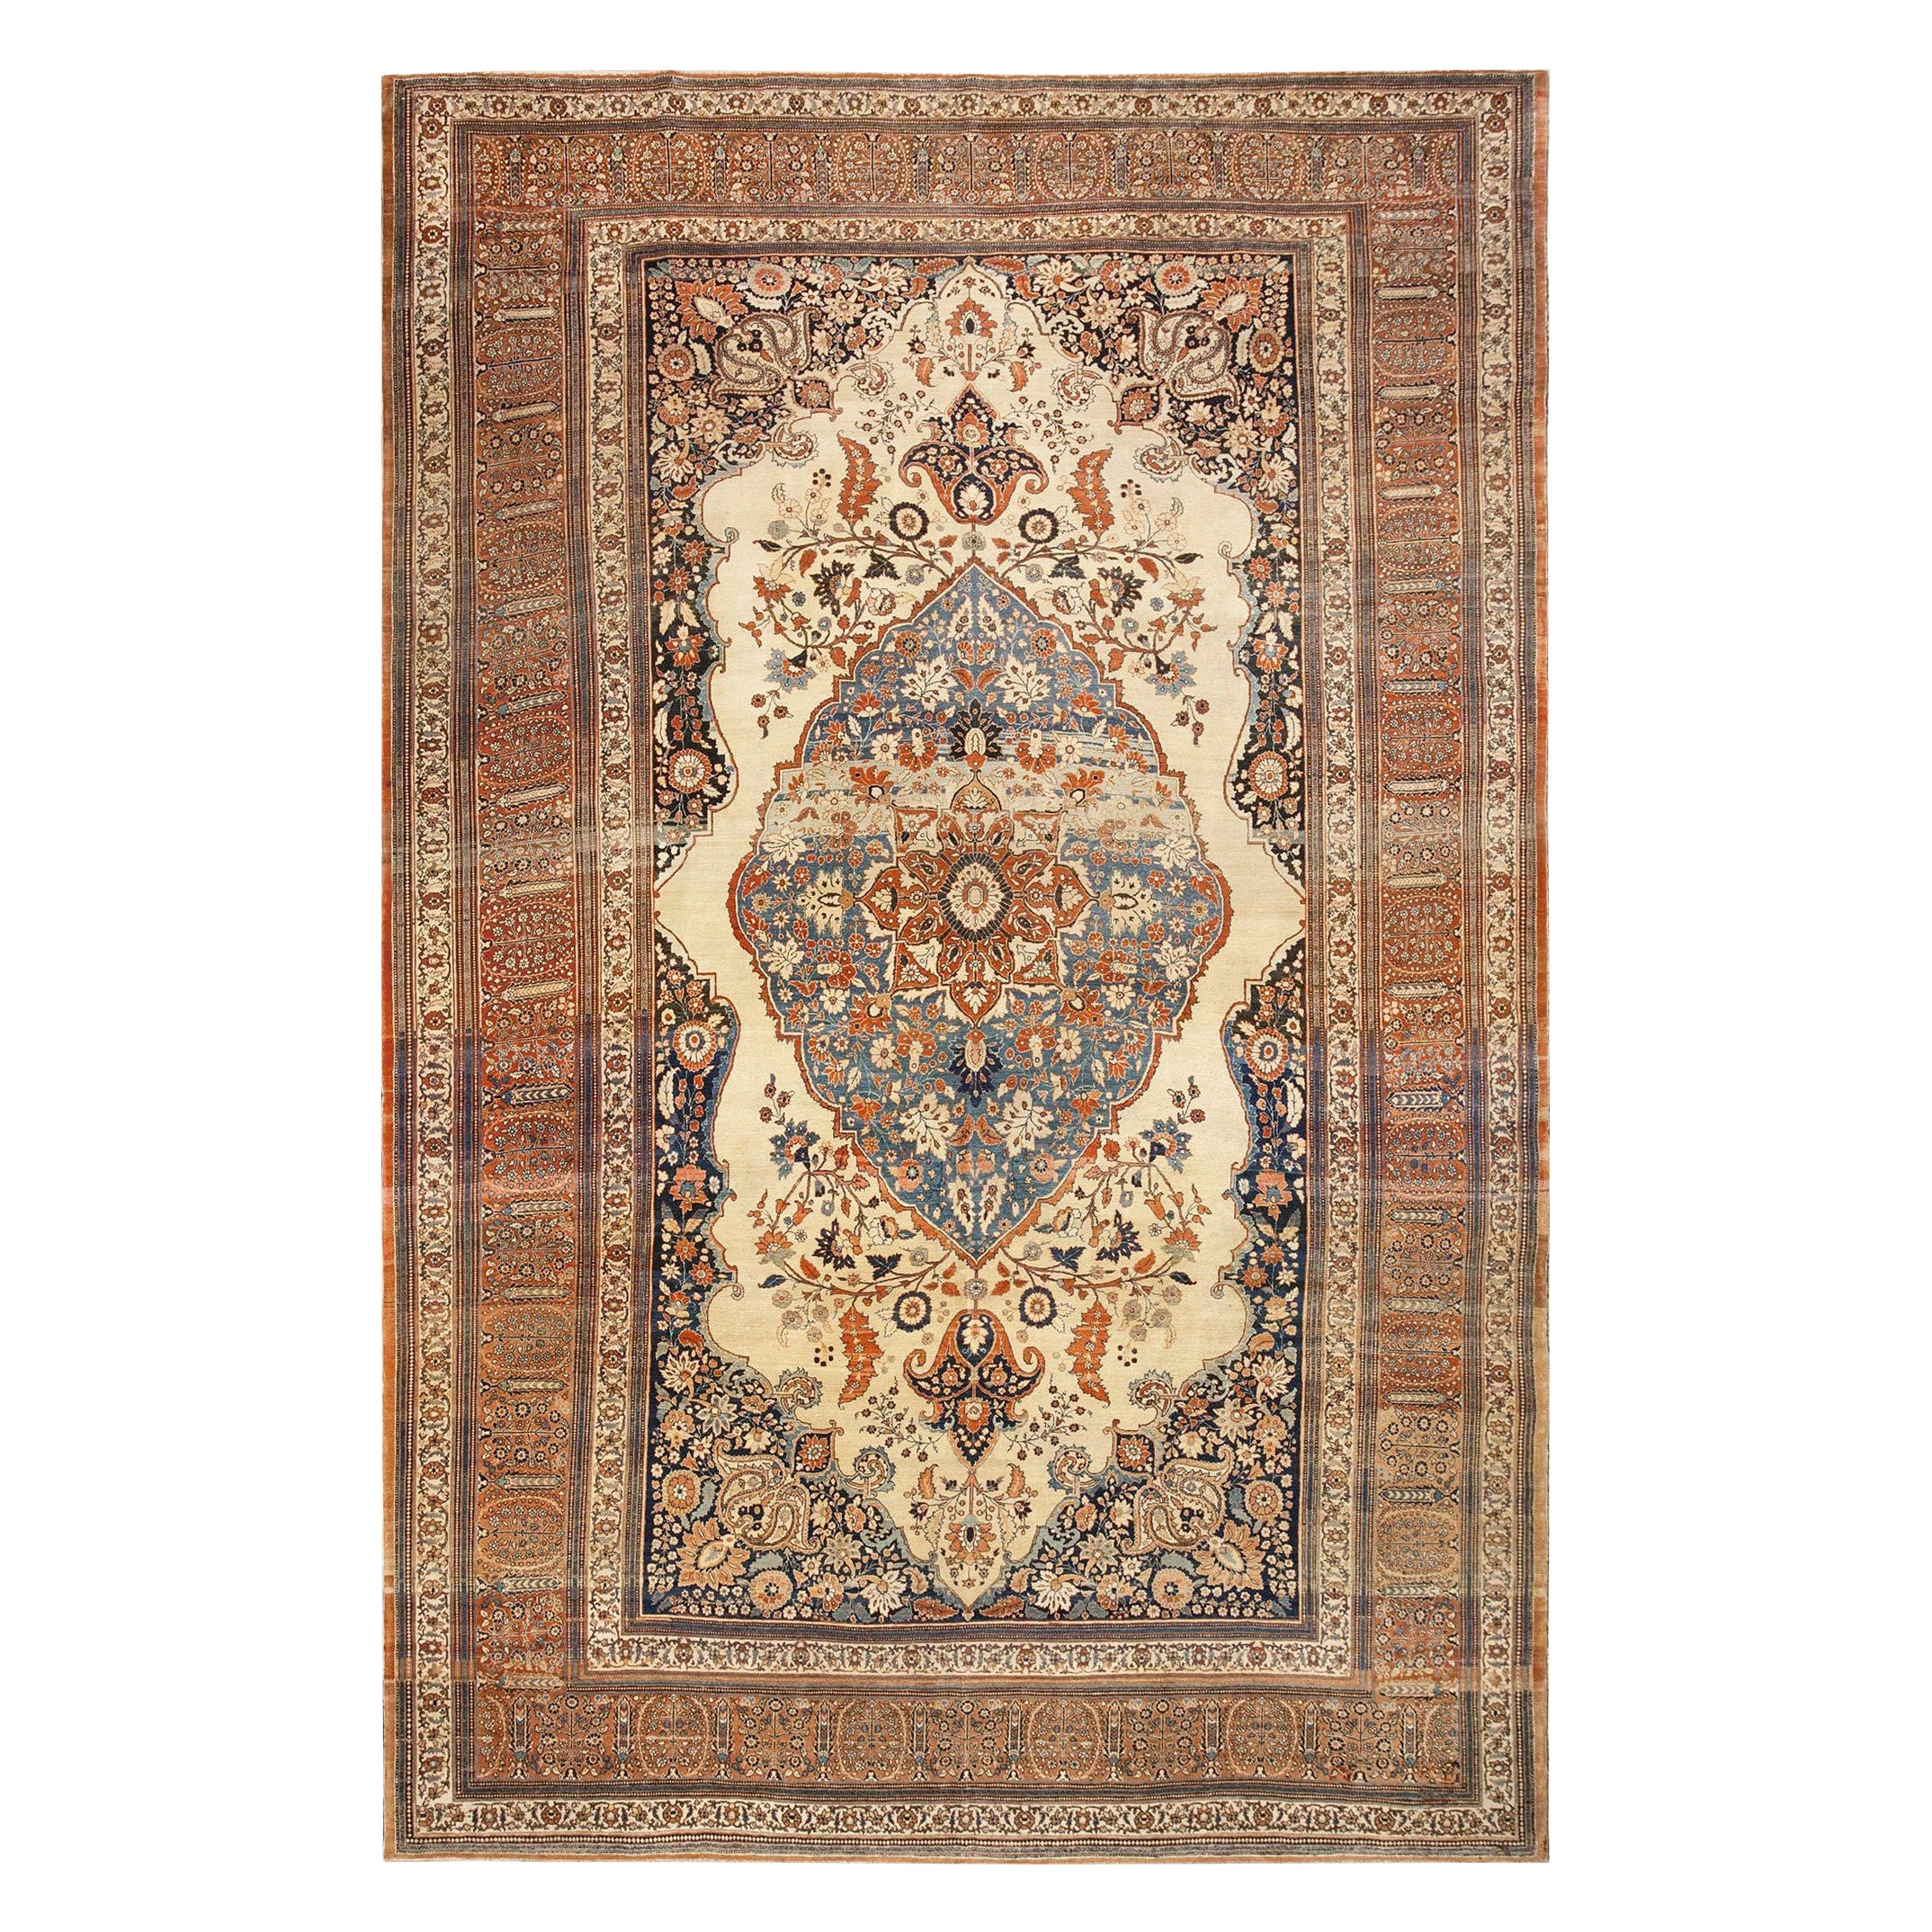 Antique Persian Tabriz Rug. Size: 10 ft x 15 ft 3 in 